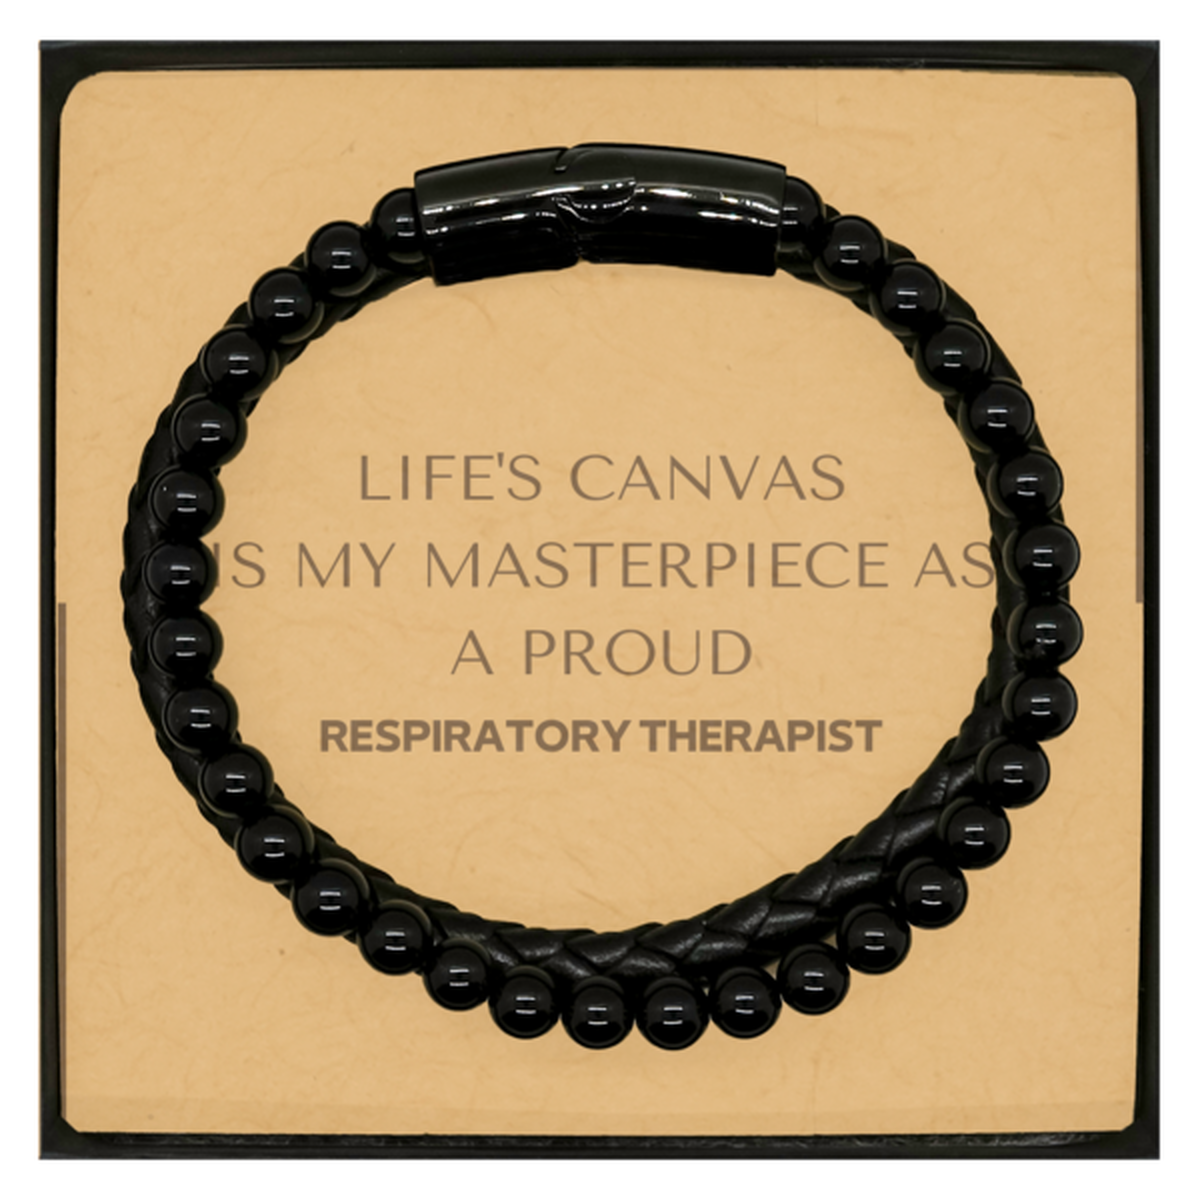 Proud Respiratory Therapist Gifts, Life's canvas is my masterpiece, Epic Birthday Christmas Unique Stone Leather Bracelets For Respiratory Therapist, Coworkers, Men, Women, Friends